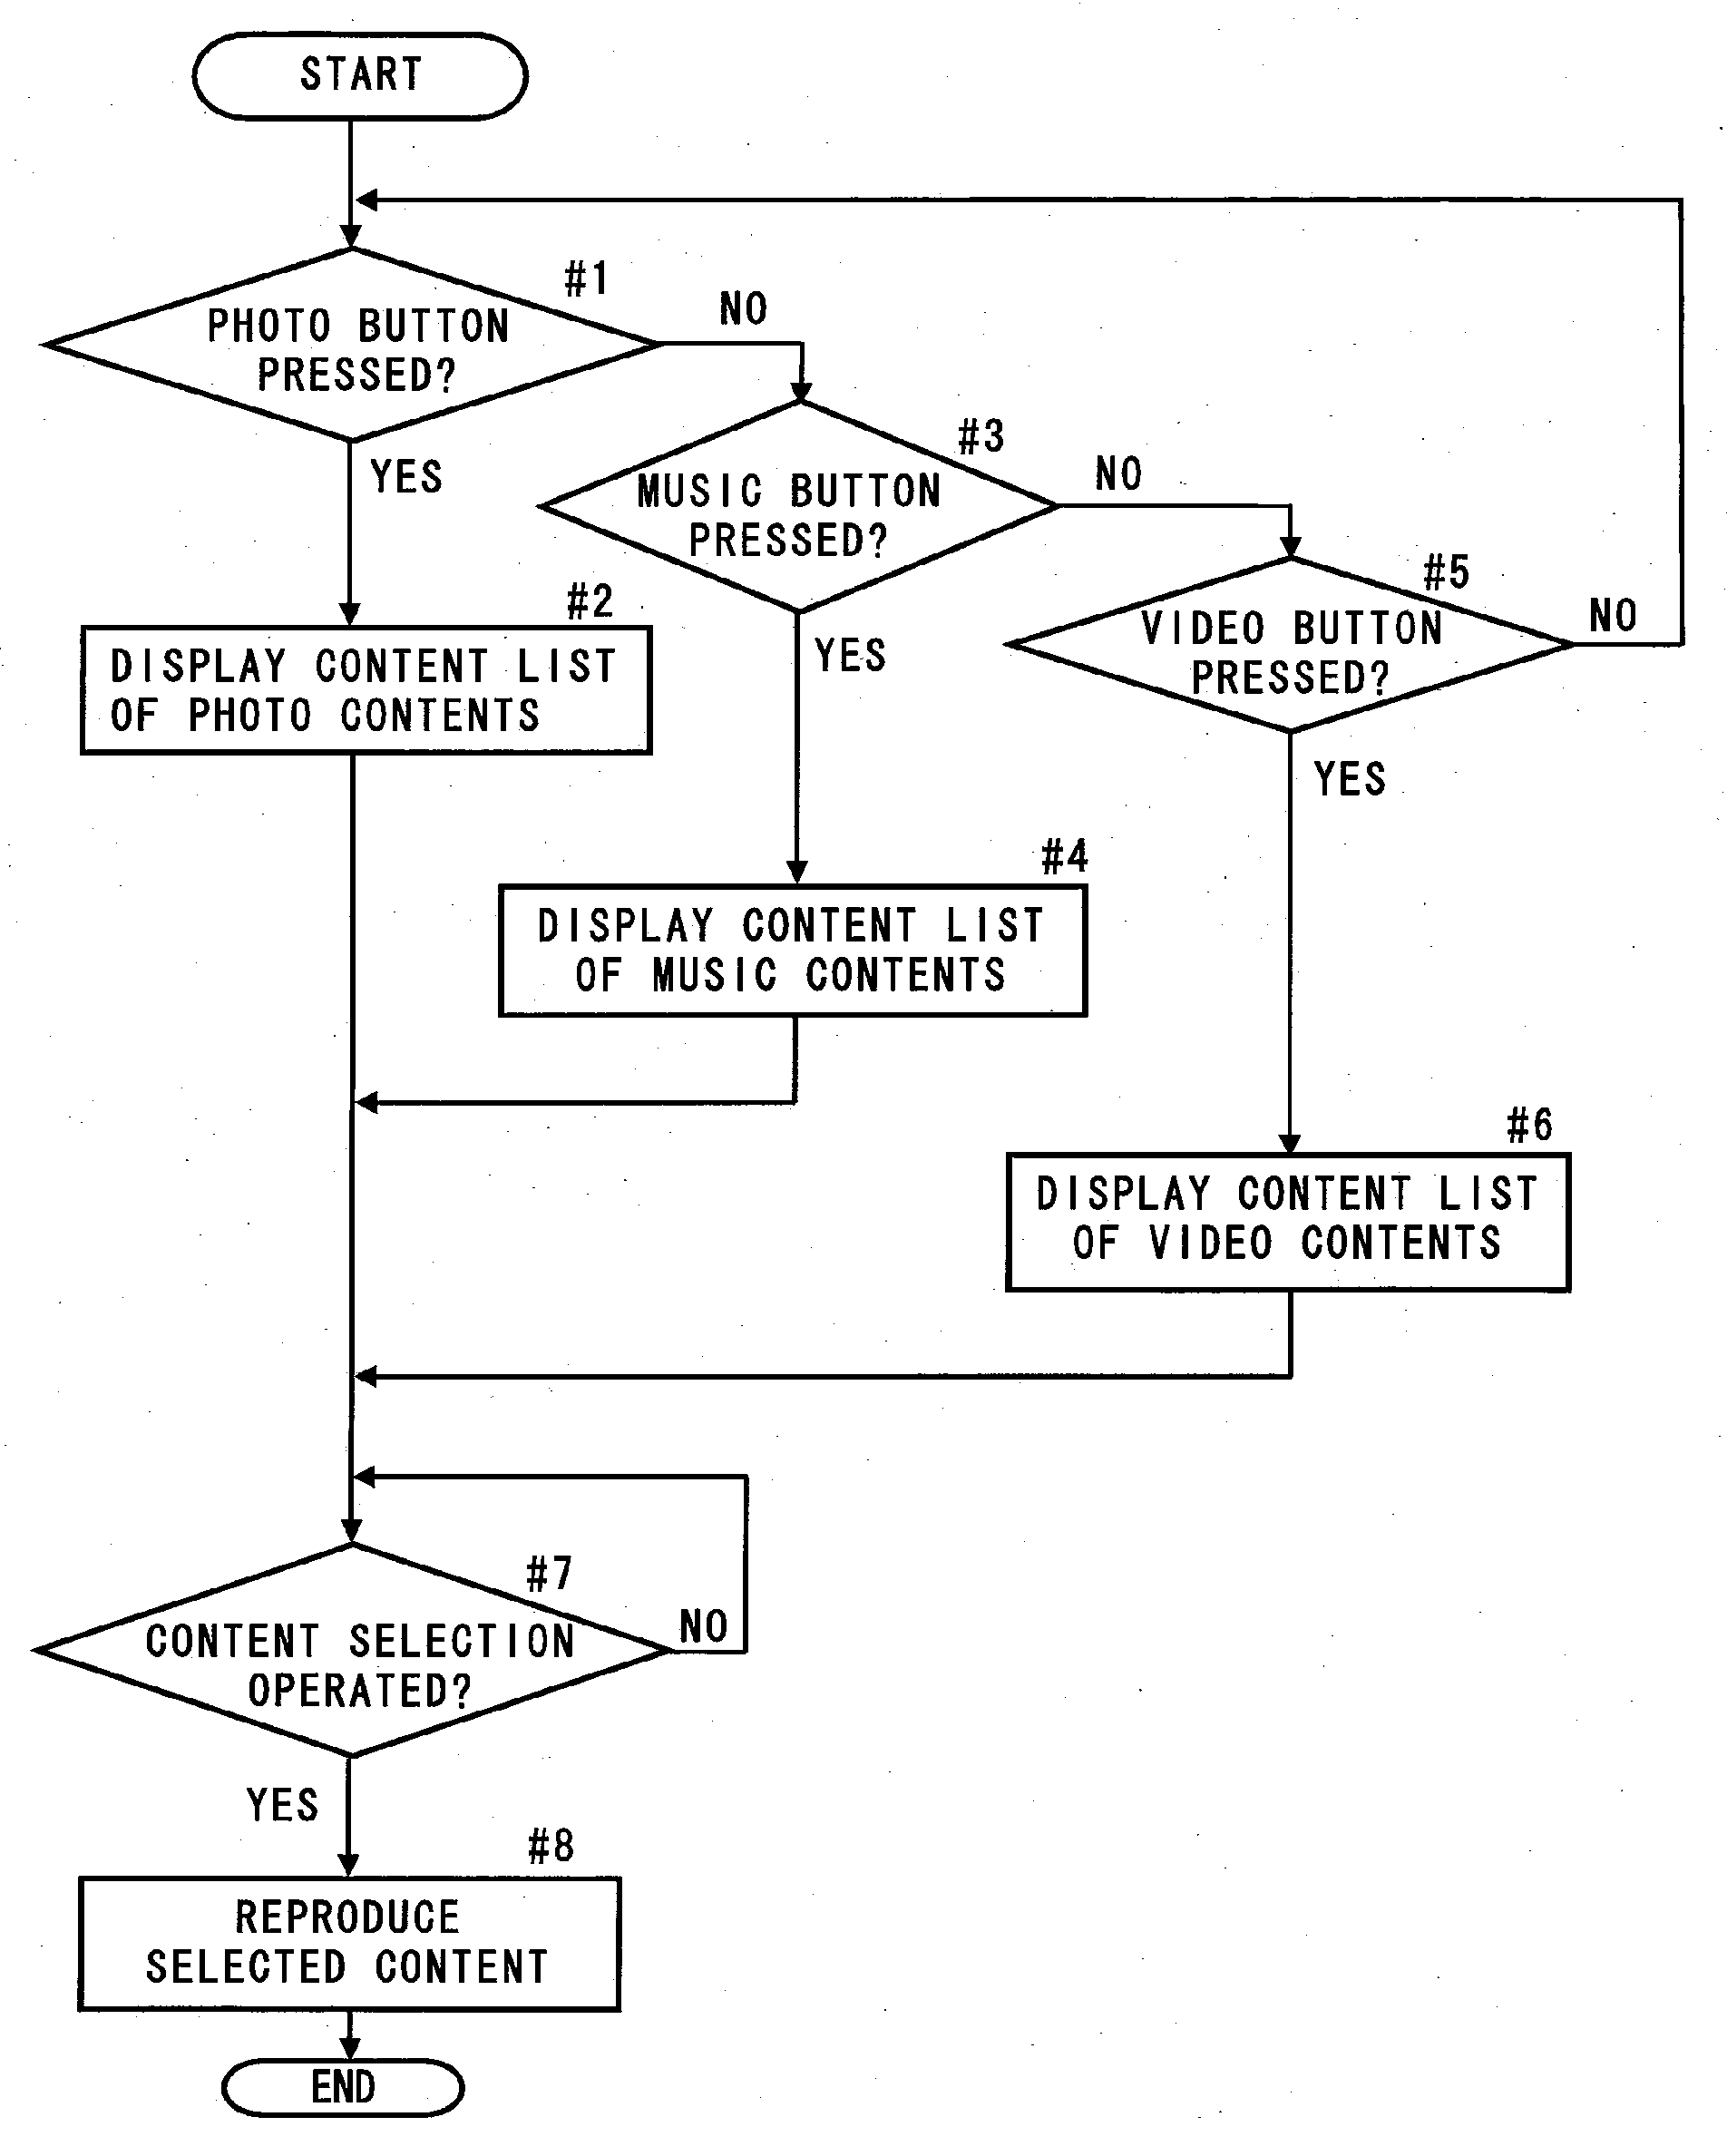 Content Reproducing Device